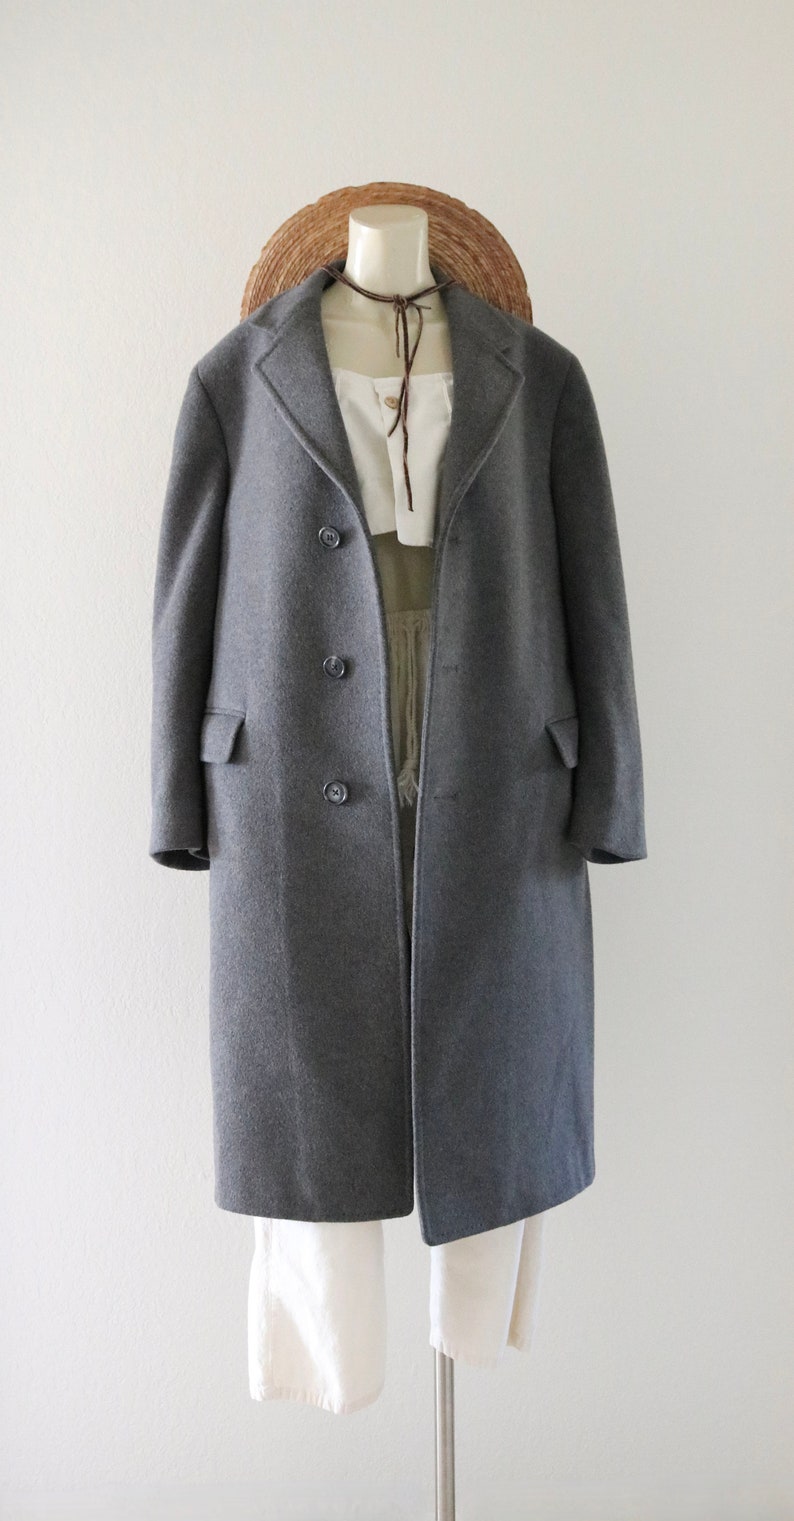 charcoal wool oversized coat vintage 80s 90s unisex mens womens gray trench jacket overcoat image 2